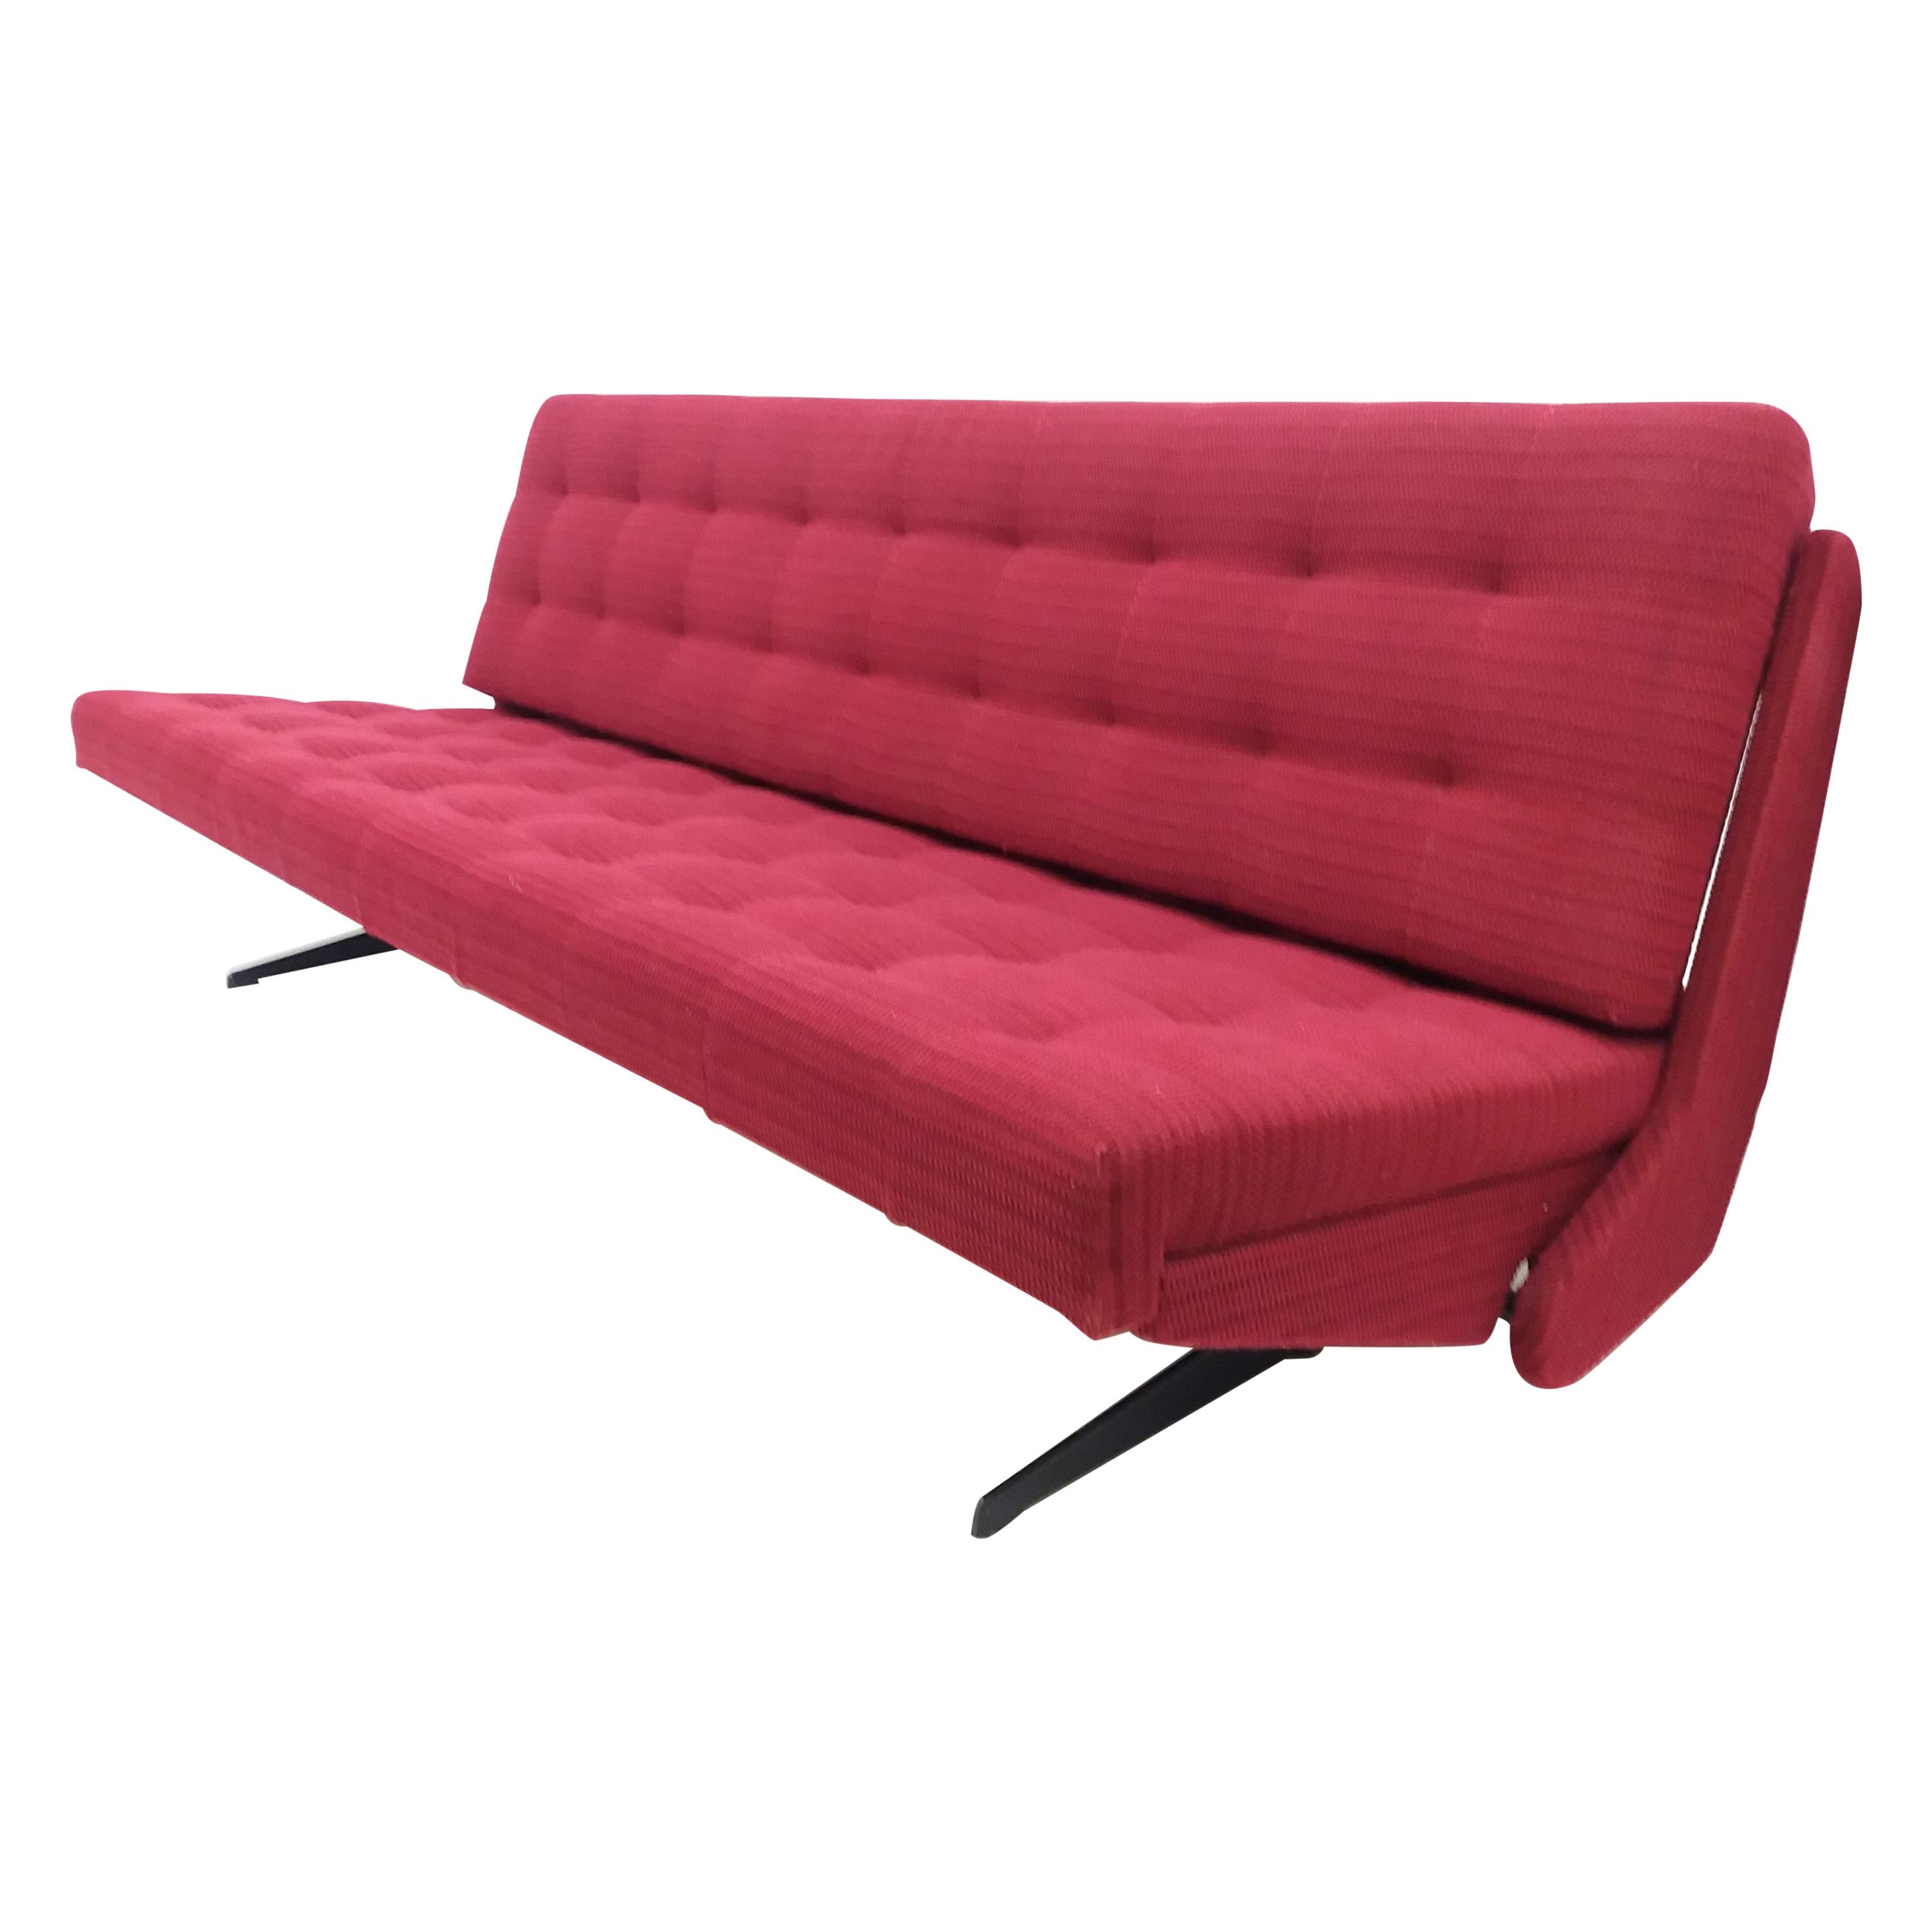 Mid-Century Adjustable Red Sofa, 1968 For Sale